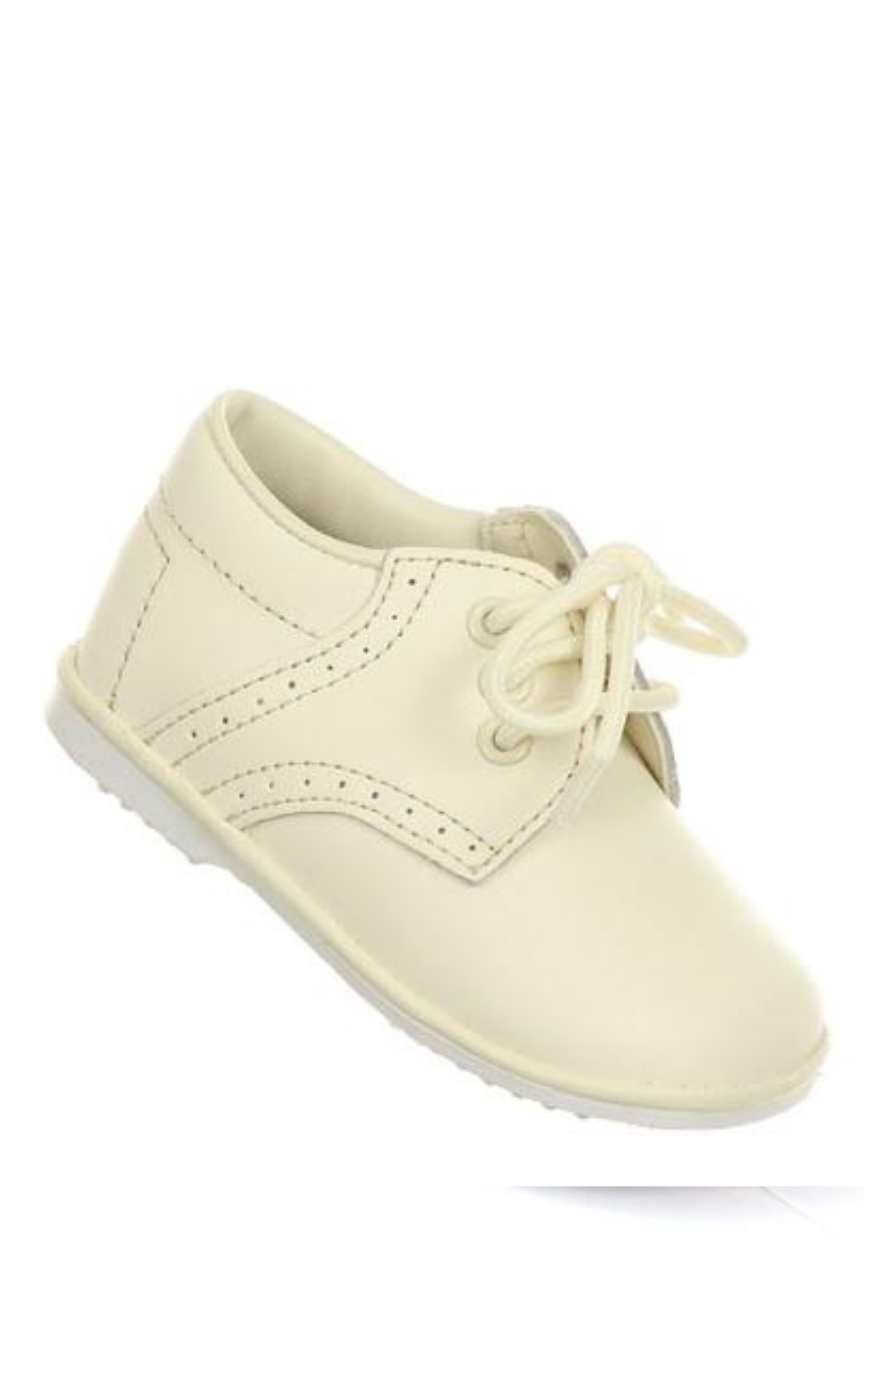 Leather Shoes for Toddler Boys: IVORY